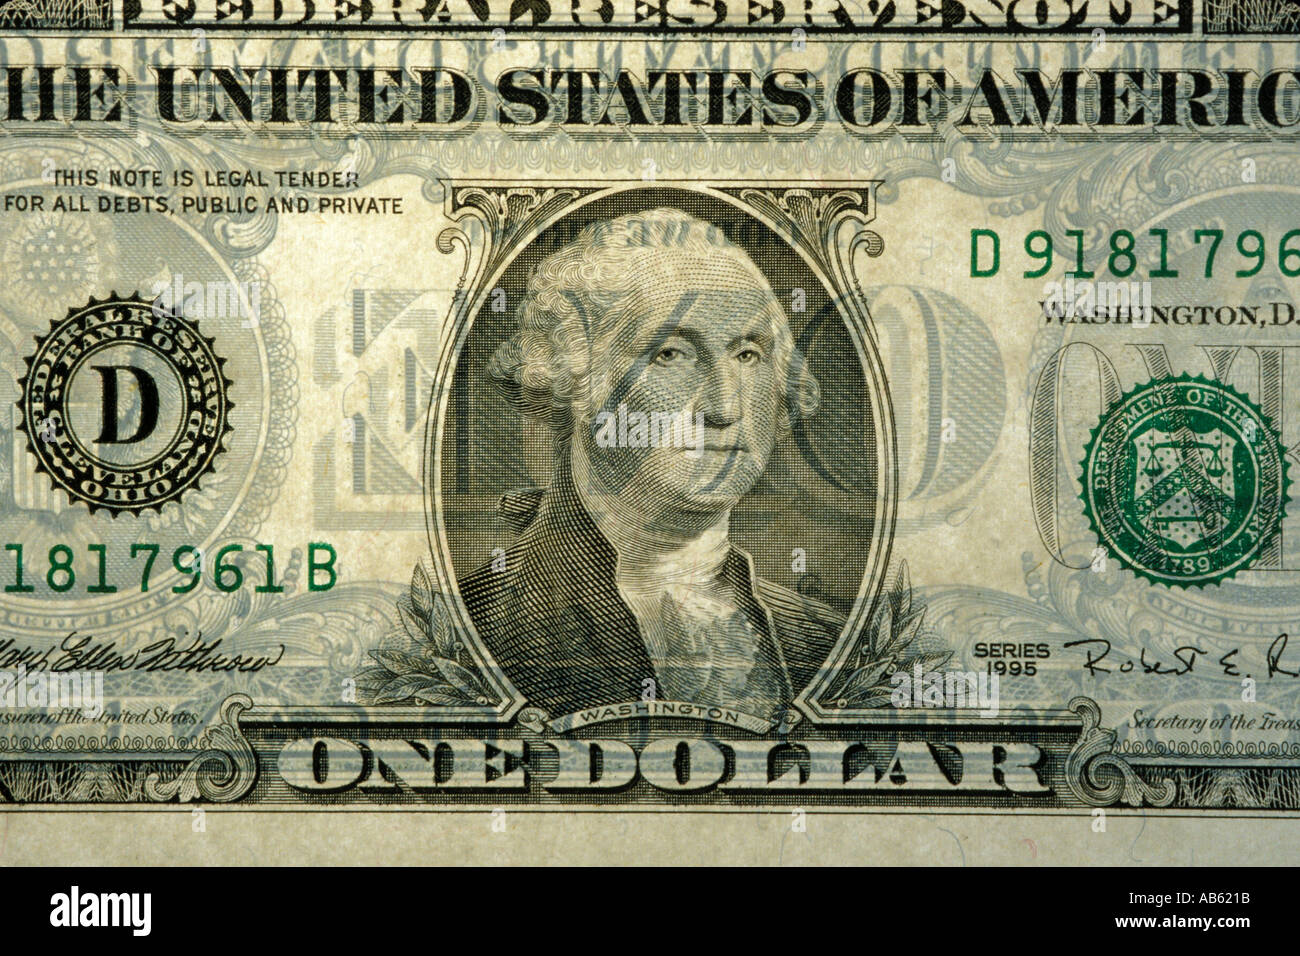 United States One Dollar bill 1 US currency translucent view of both sides at same time Stock Photo